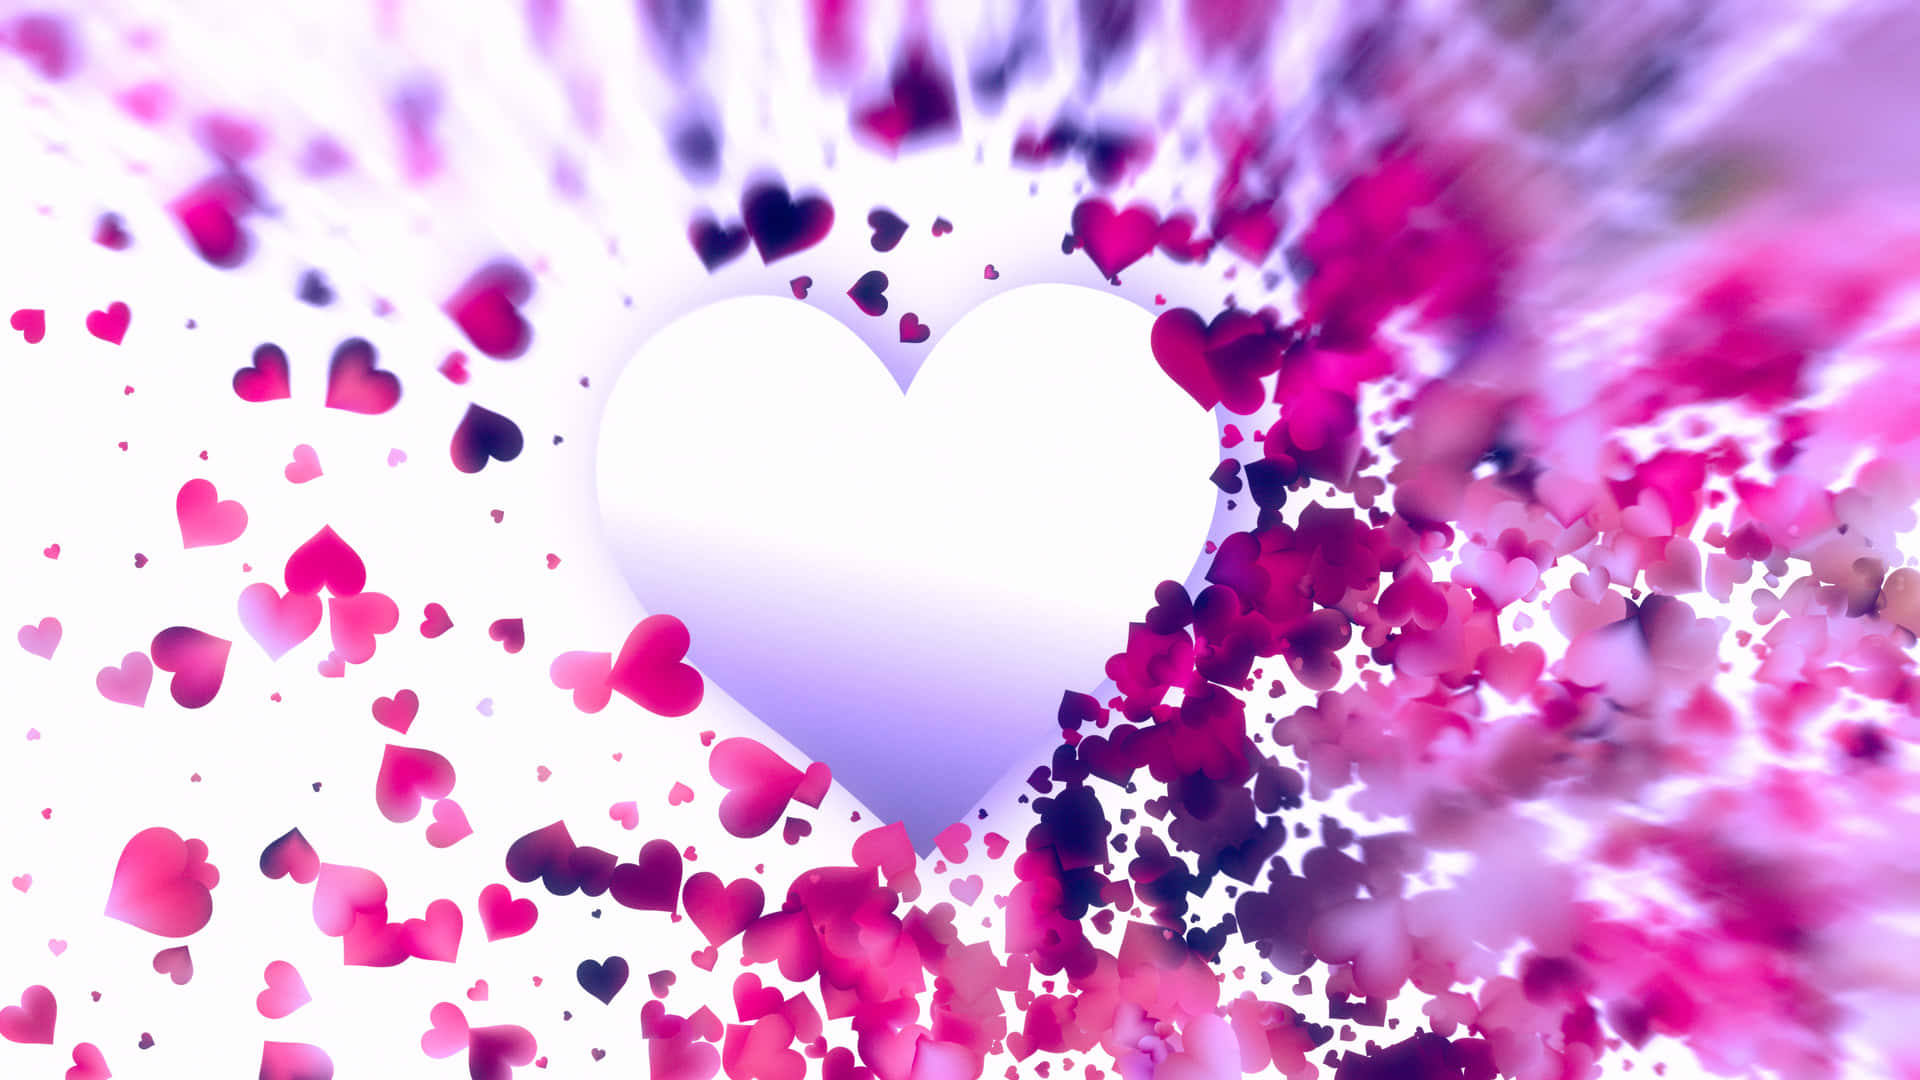 Abstract Heart Explosion Wallpaper